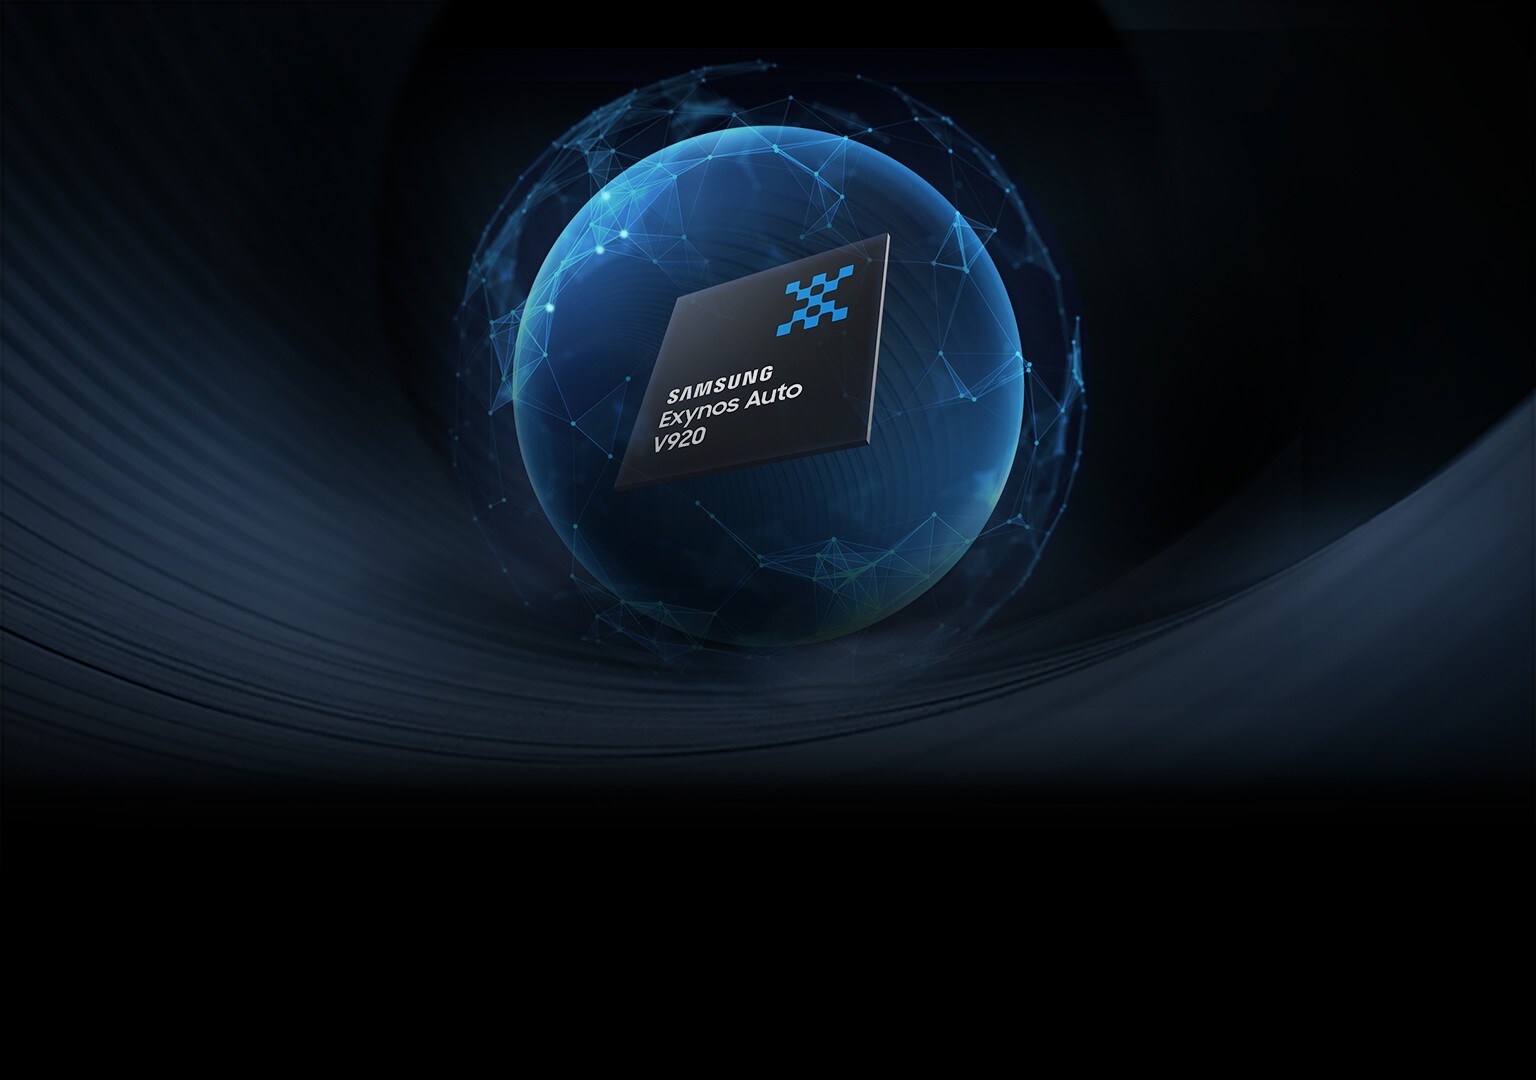 Samsung Exynos Auto V920 products is placed in front of the globe-shaped background.